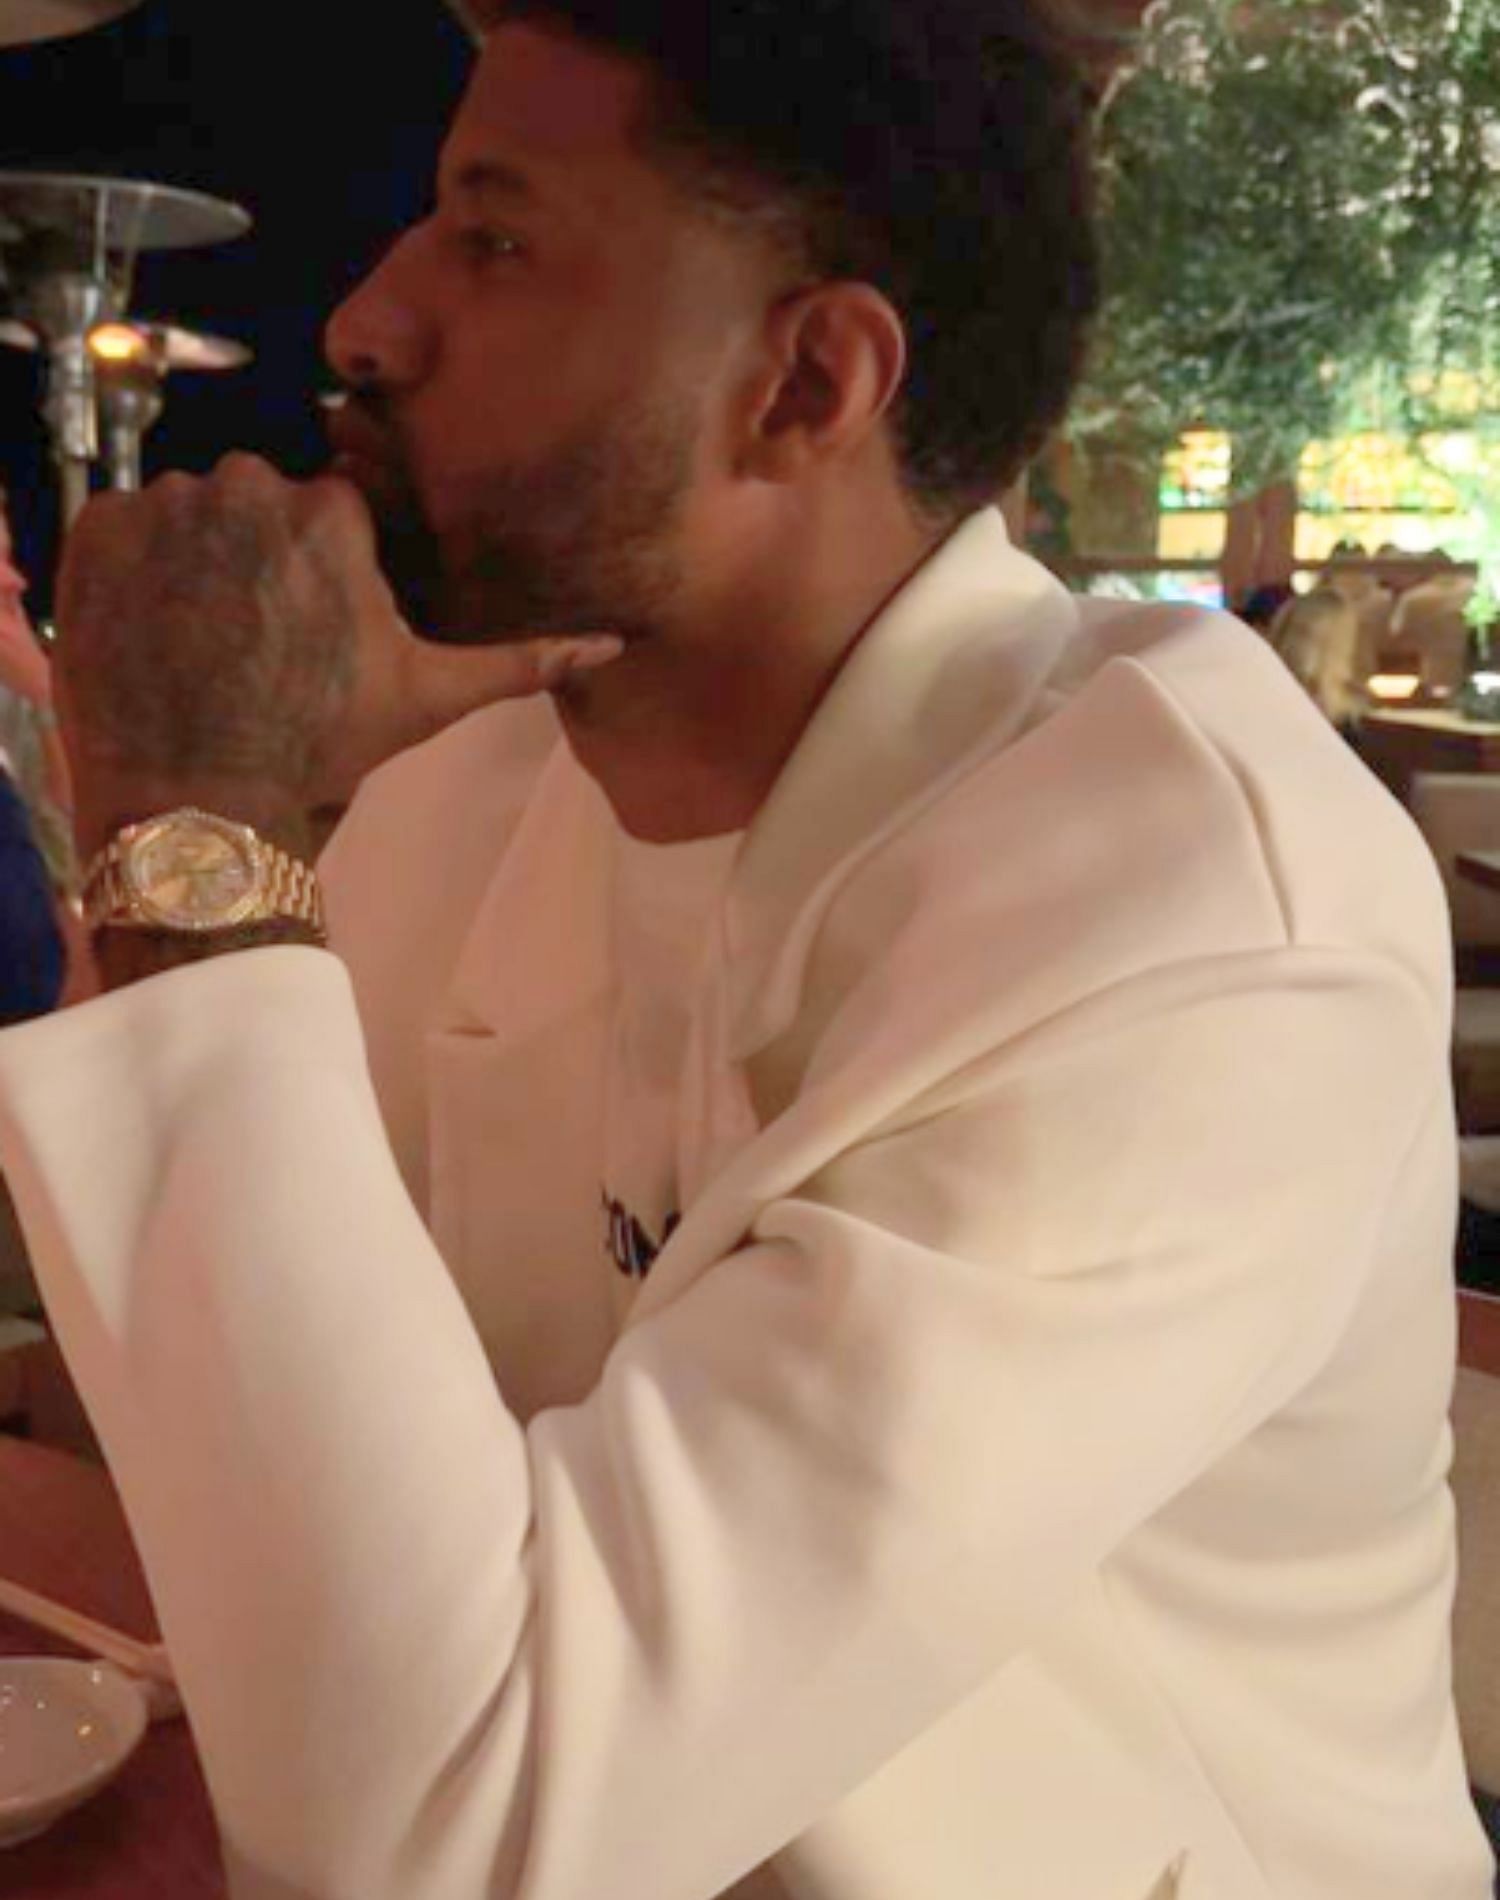 Paul George wearing his expensive Rolex watch in a recent date night with his wife.